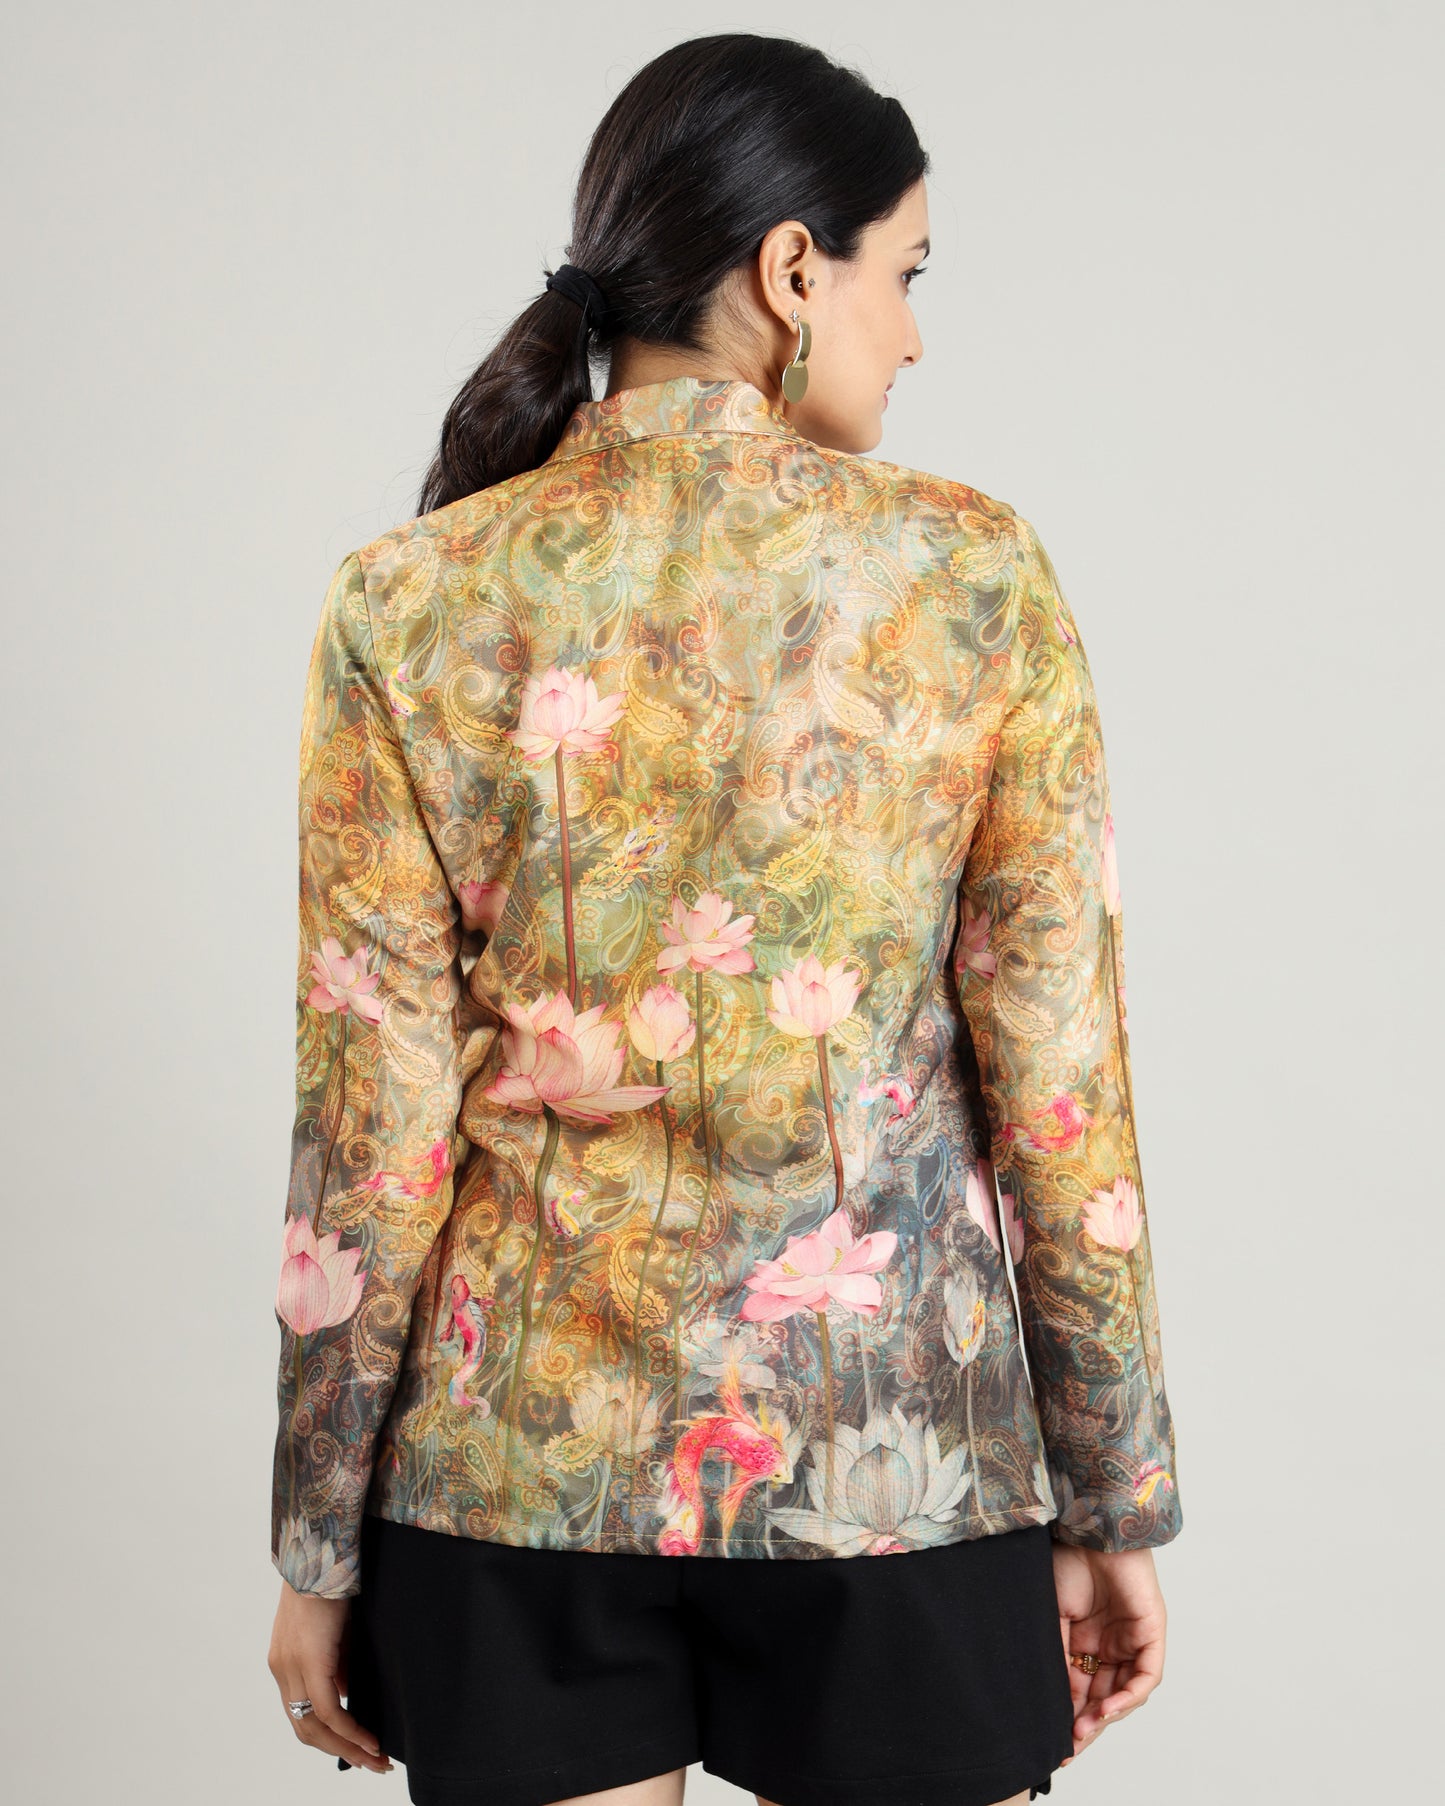 Bestselling Jacket For The Empowered Woman